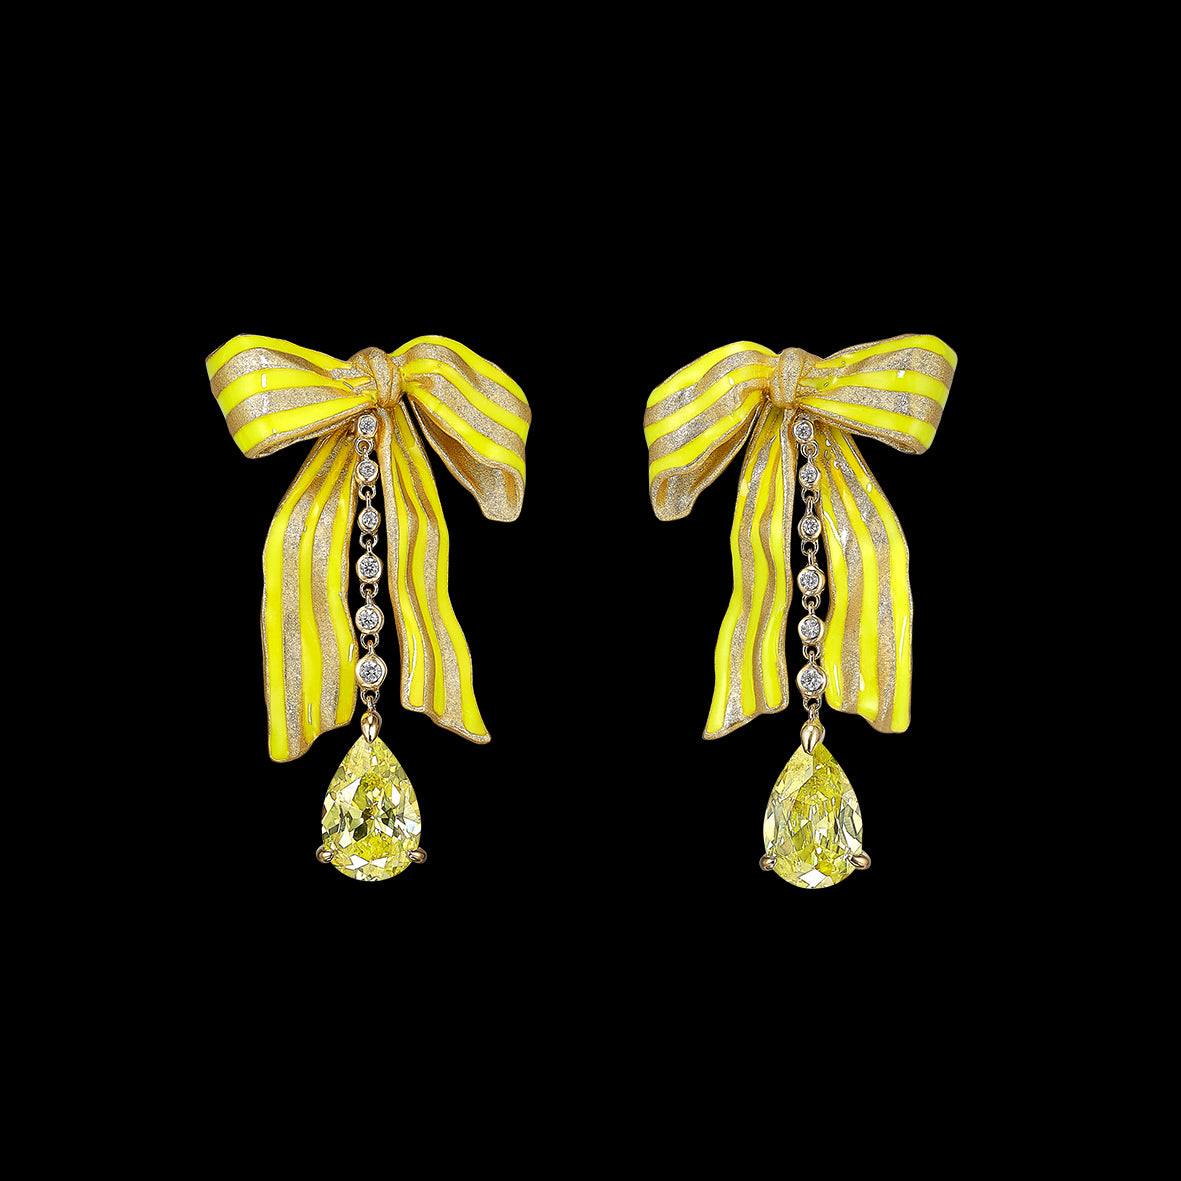 Canary Bardot Bow Earrings, Earrings, Anabela Chan Joaillerie - Fine jewelry with laboratory grown and created gemstones hand-crafted in the United Kingdom. Anabela Chan Joaillerie is the first fine jewellery brand in the world to champion laboratory-grown and created gemstones with high jewellery design, artisanal craftsmanship and a focus on ethical and sustainable innovations.